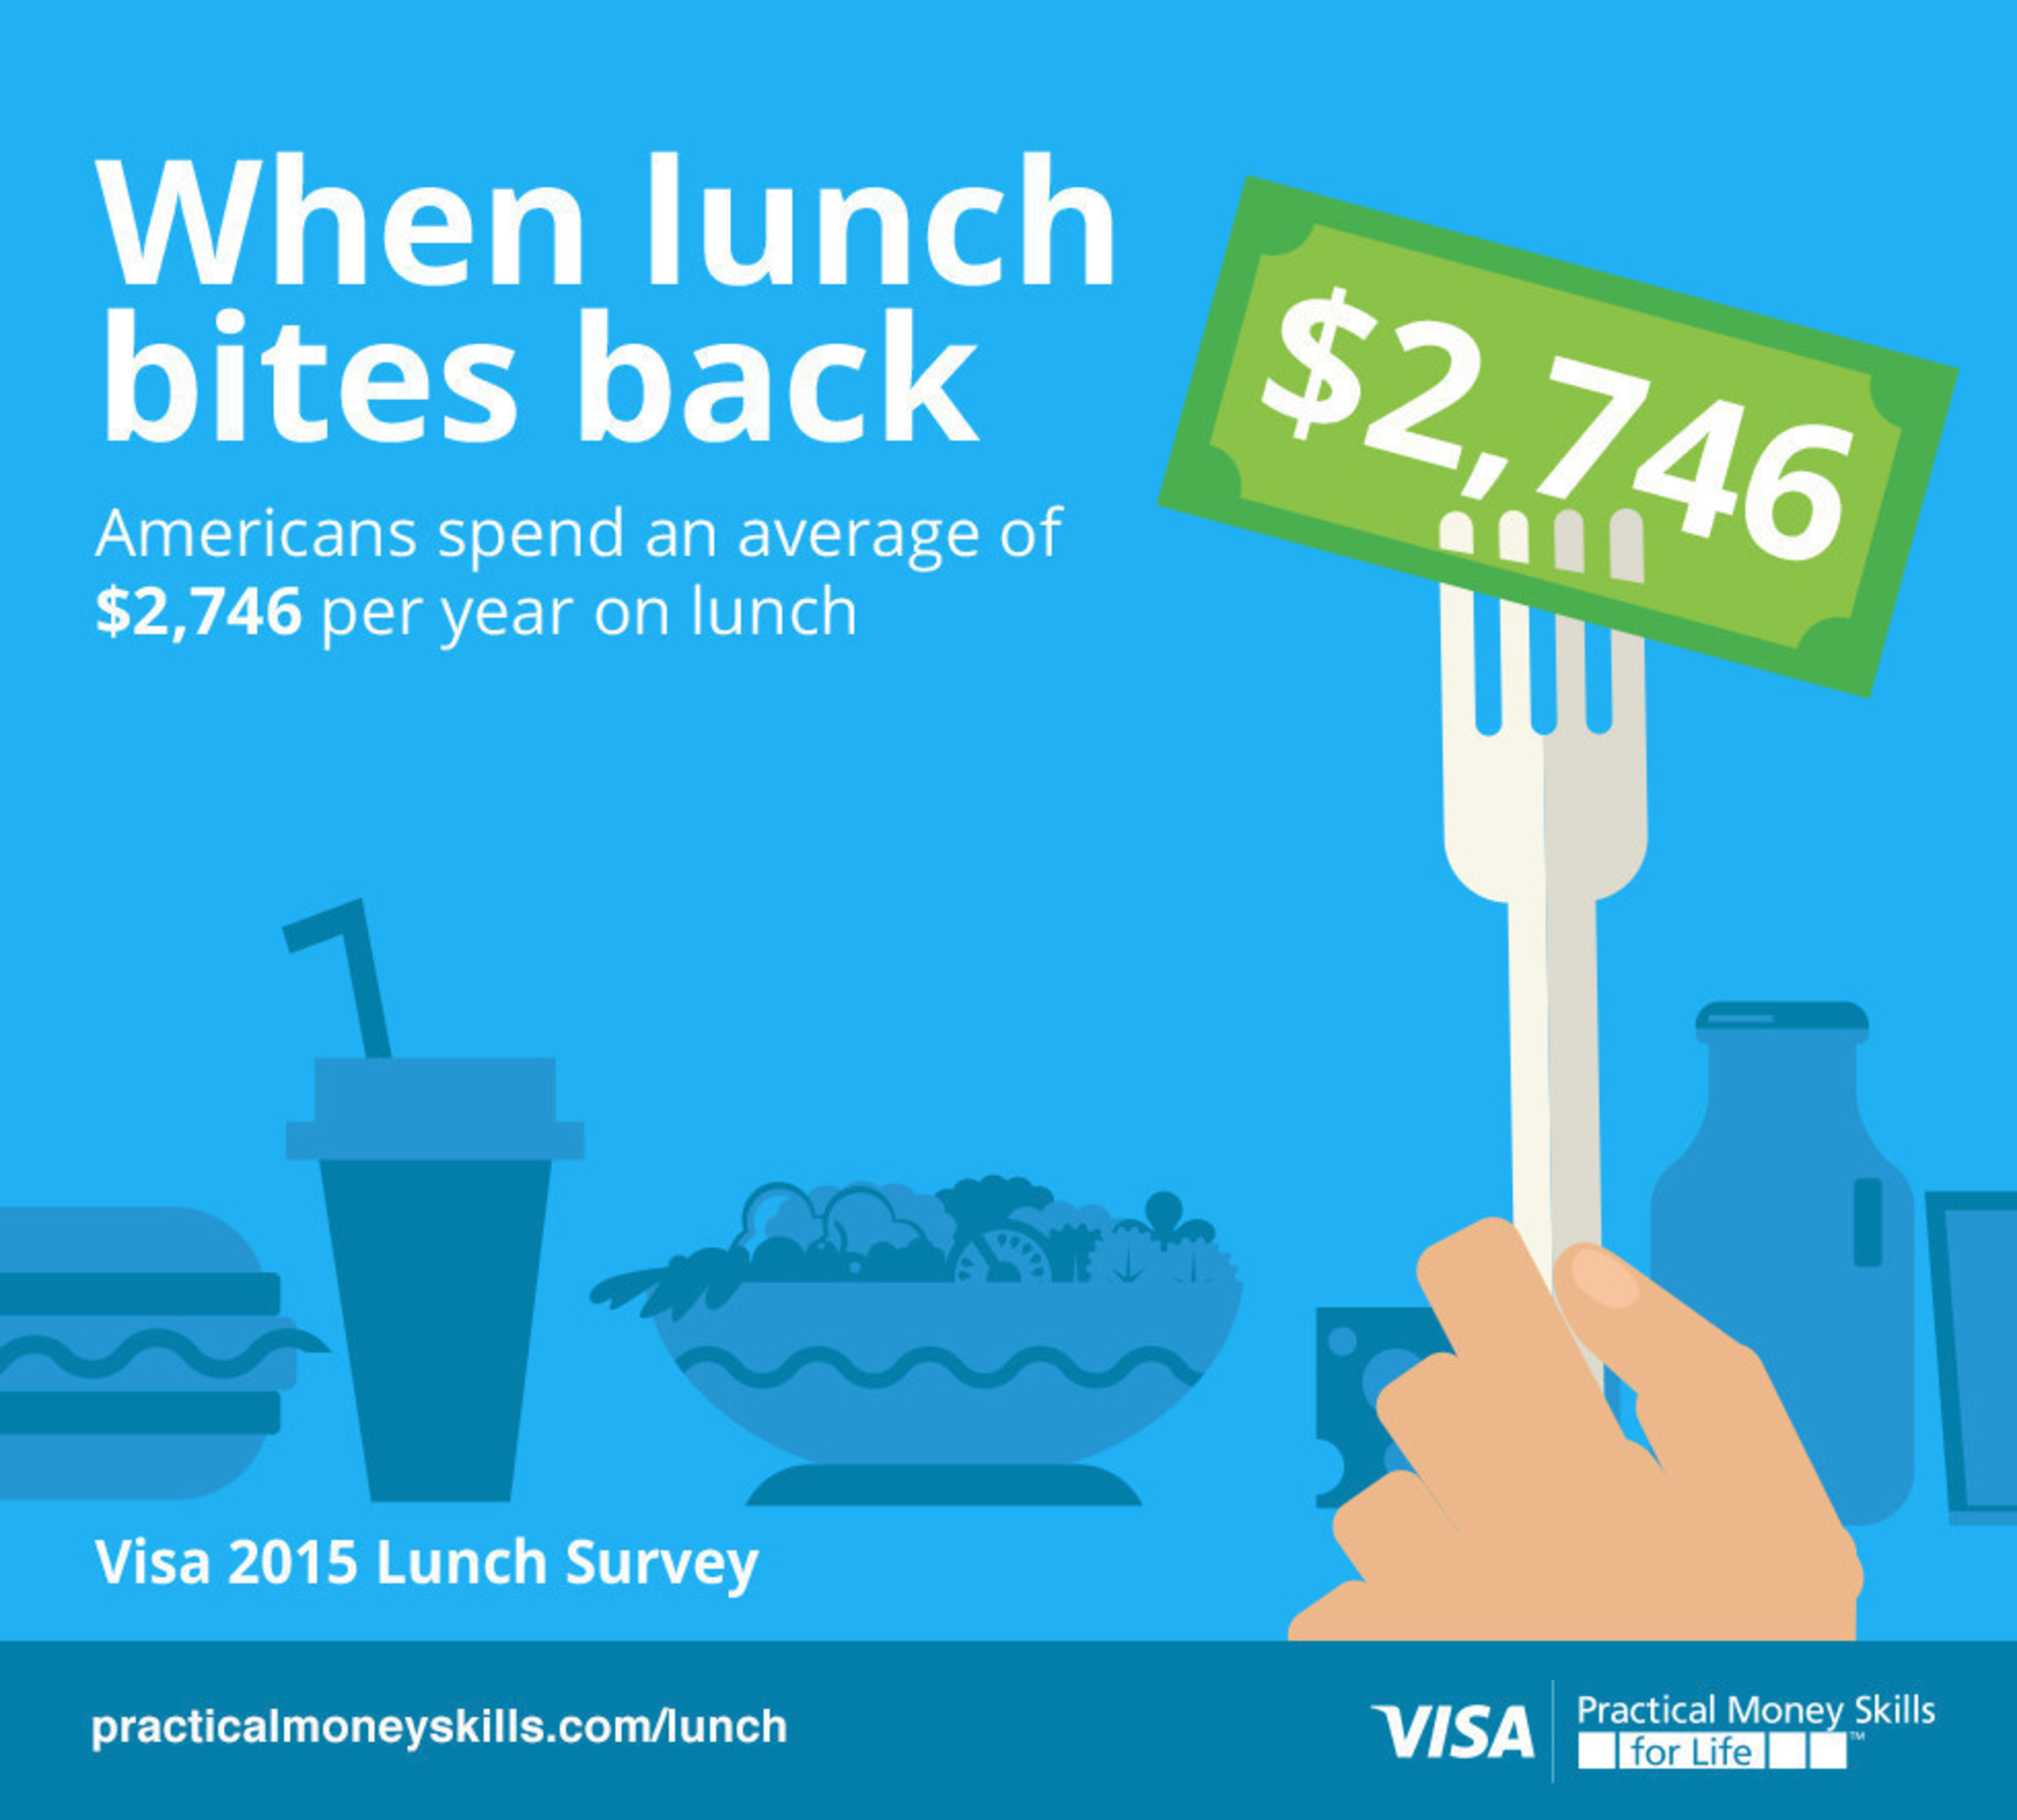 Visa: Americans Report They Spend an Average of $2,746 on Lunch Yearly